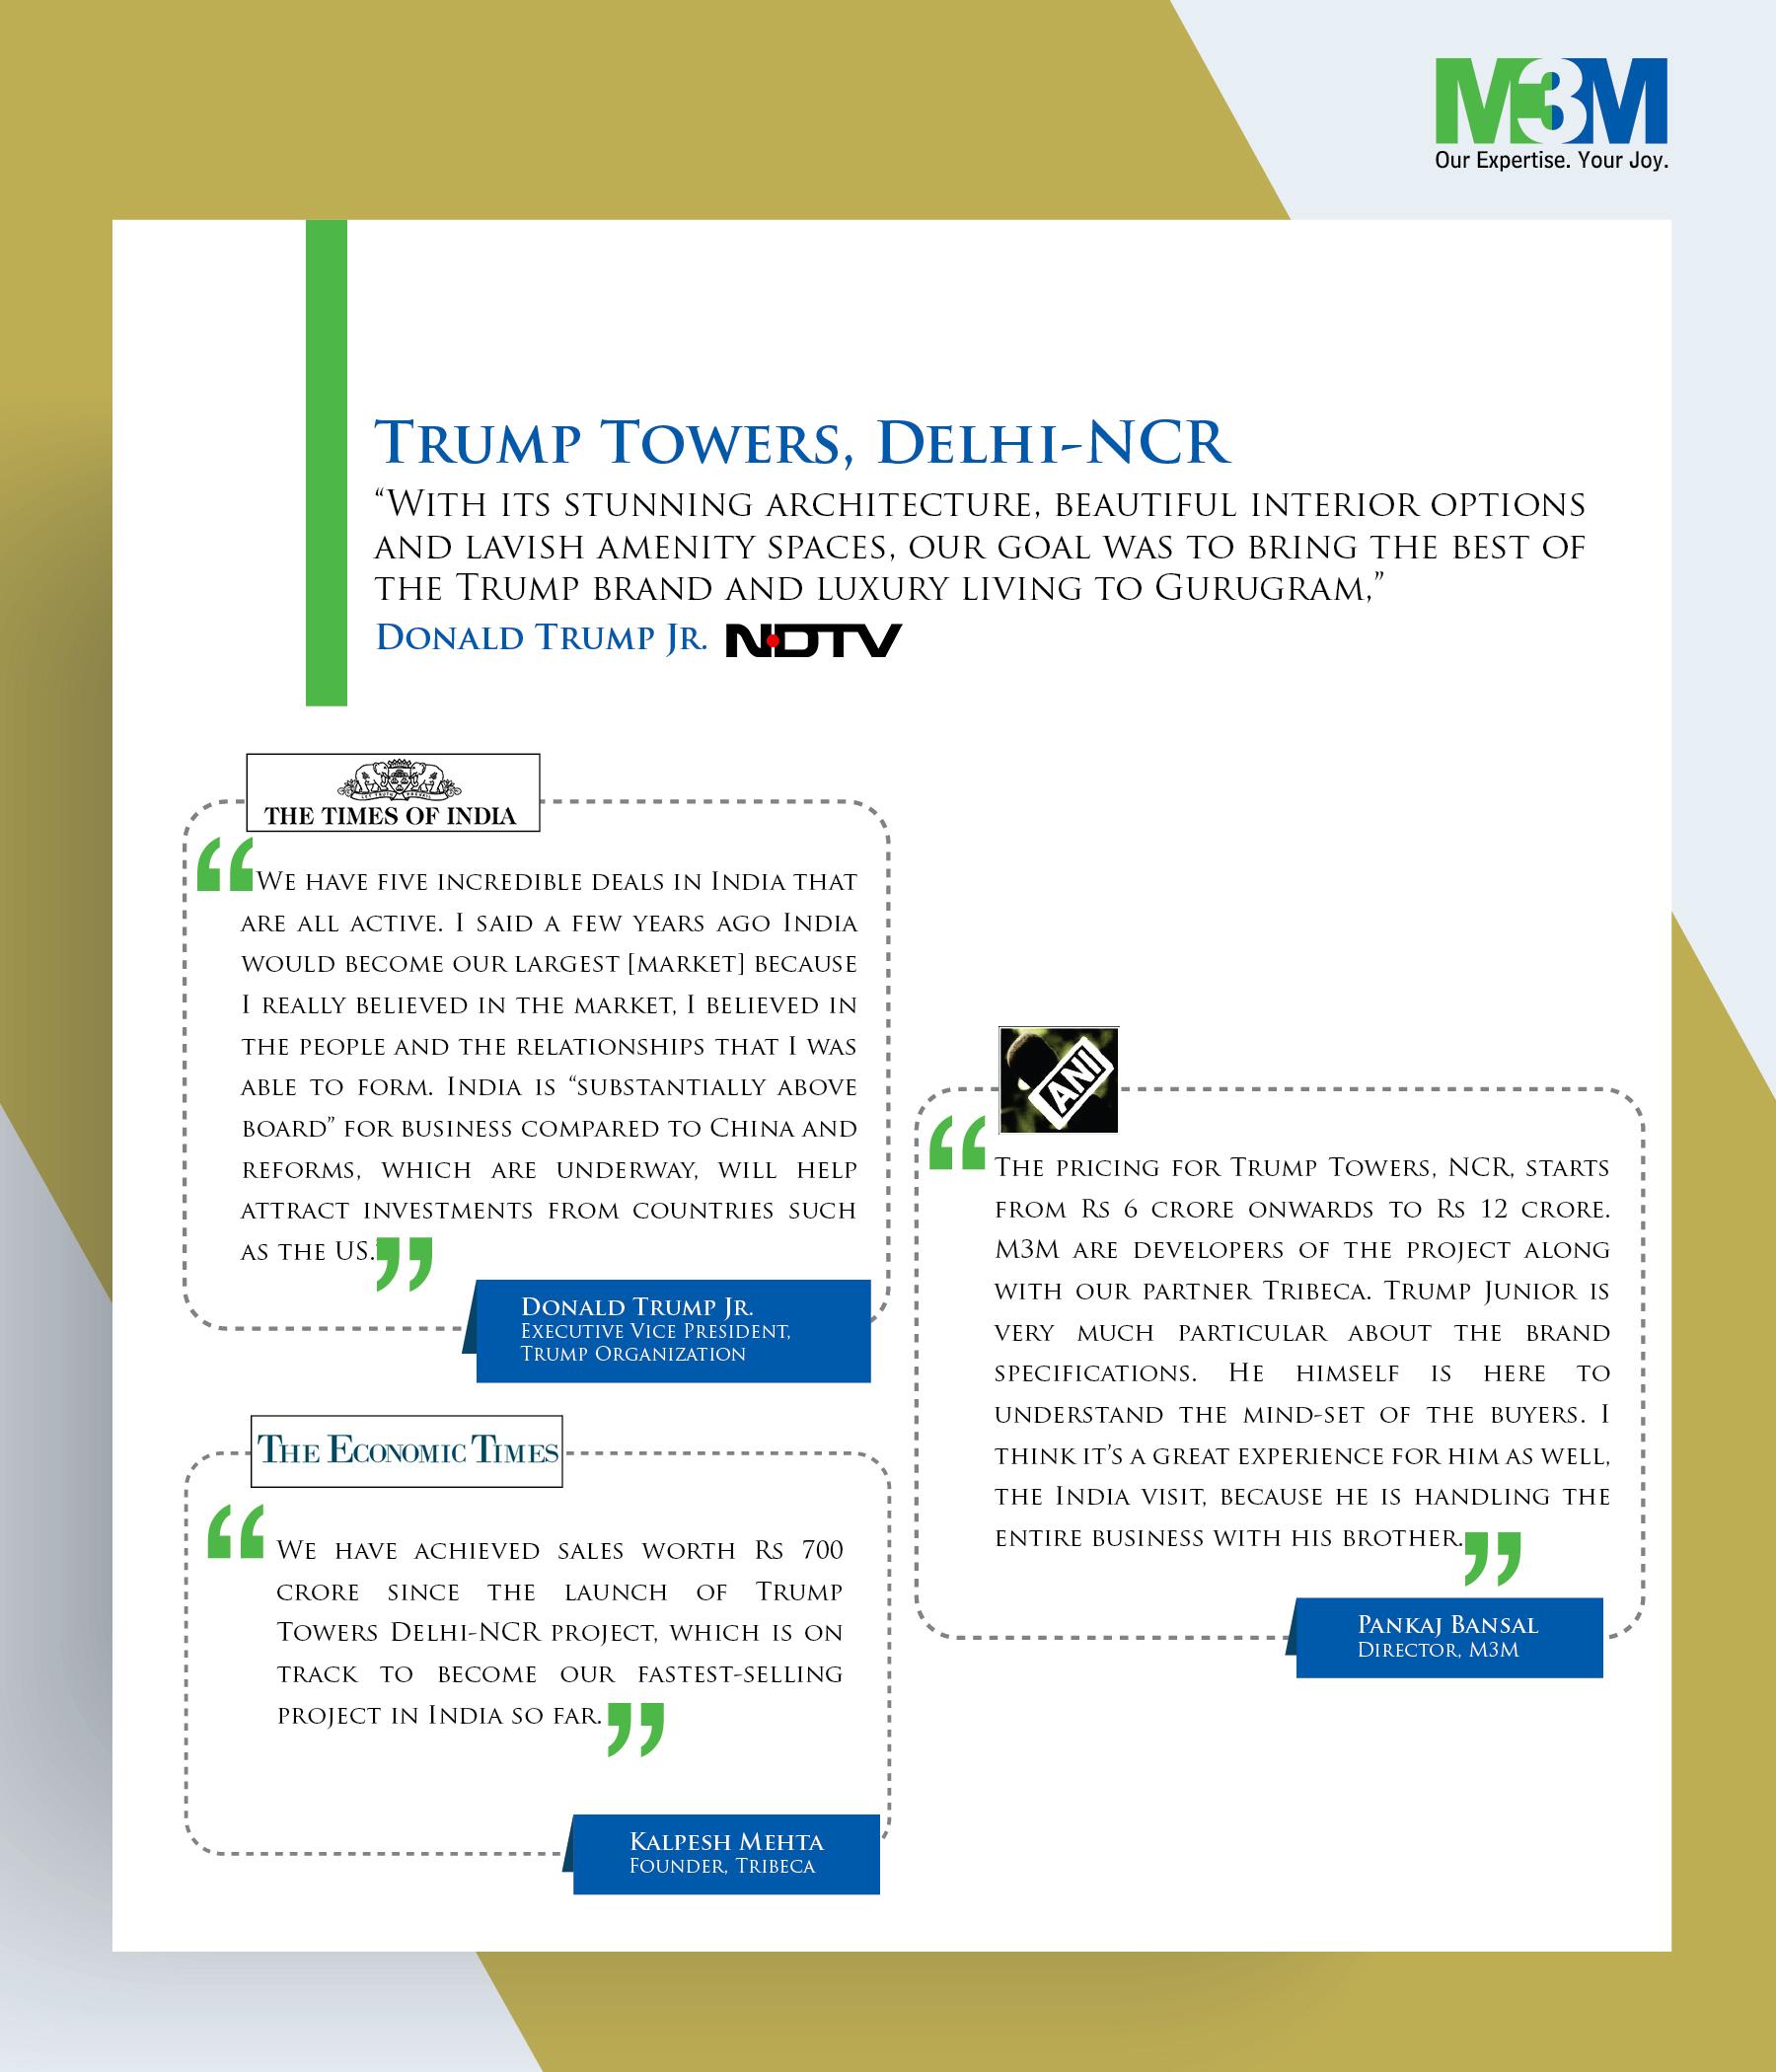 Donald Trump Jr talked about prospects in Indian realty market for Trump Towers Delhi NCR